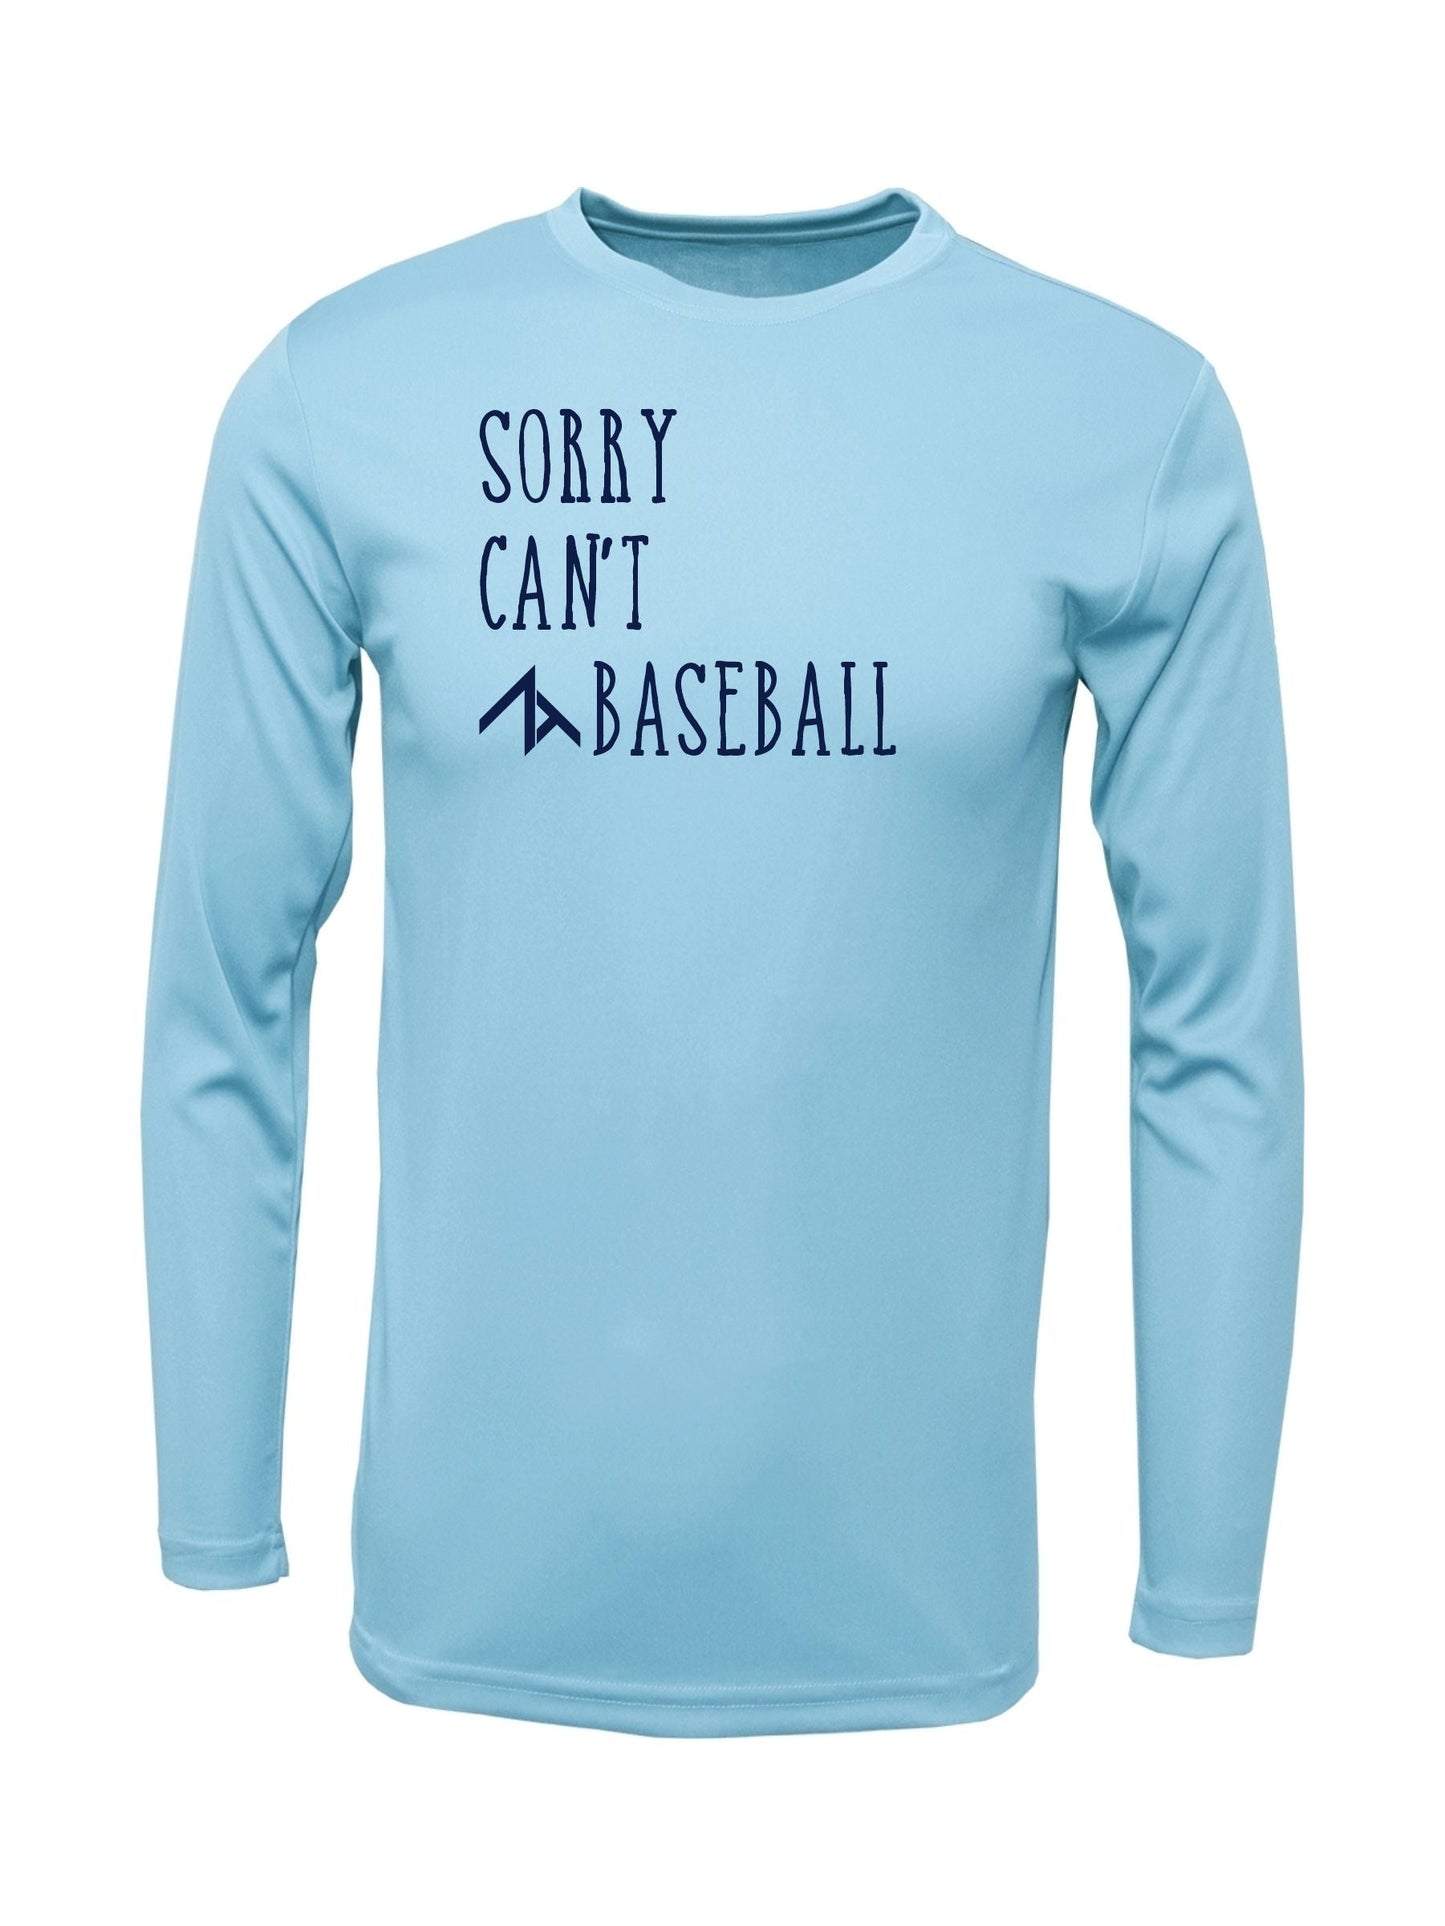 Long Sleeve "SORRY CAN'T" Cotton T-shirt